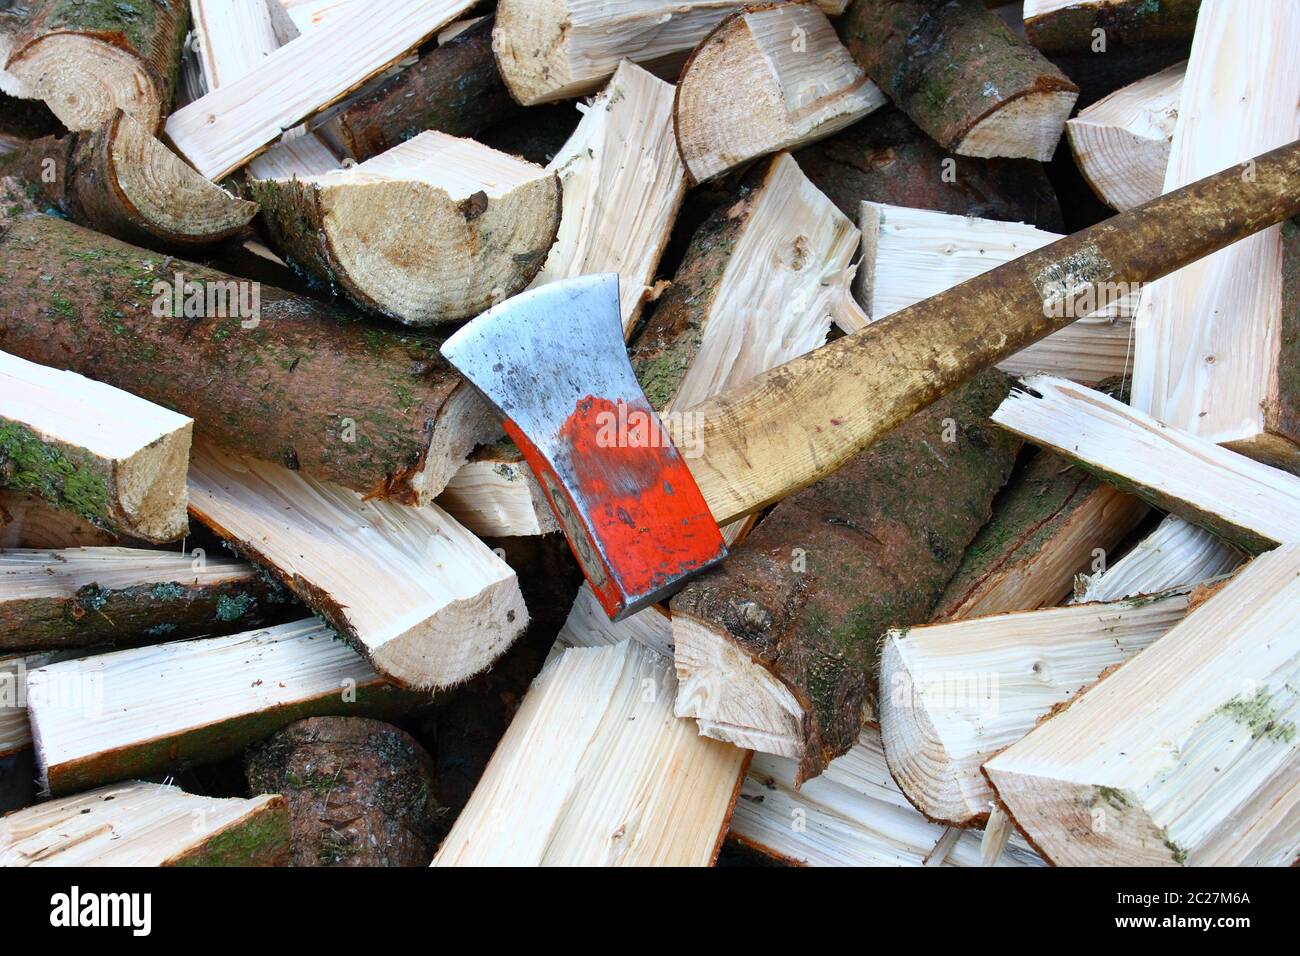 wood chips Stock Photo